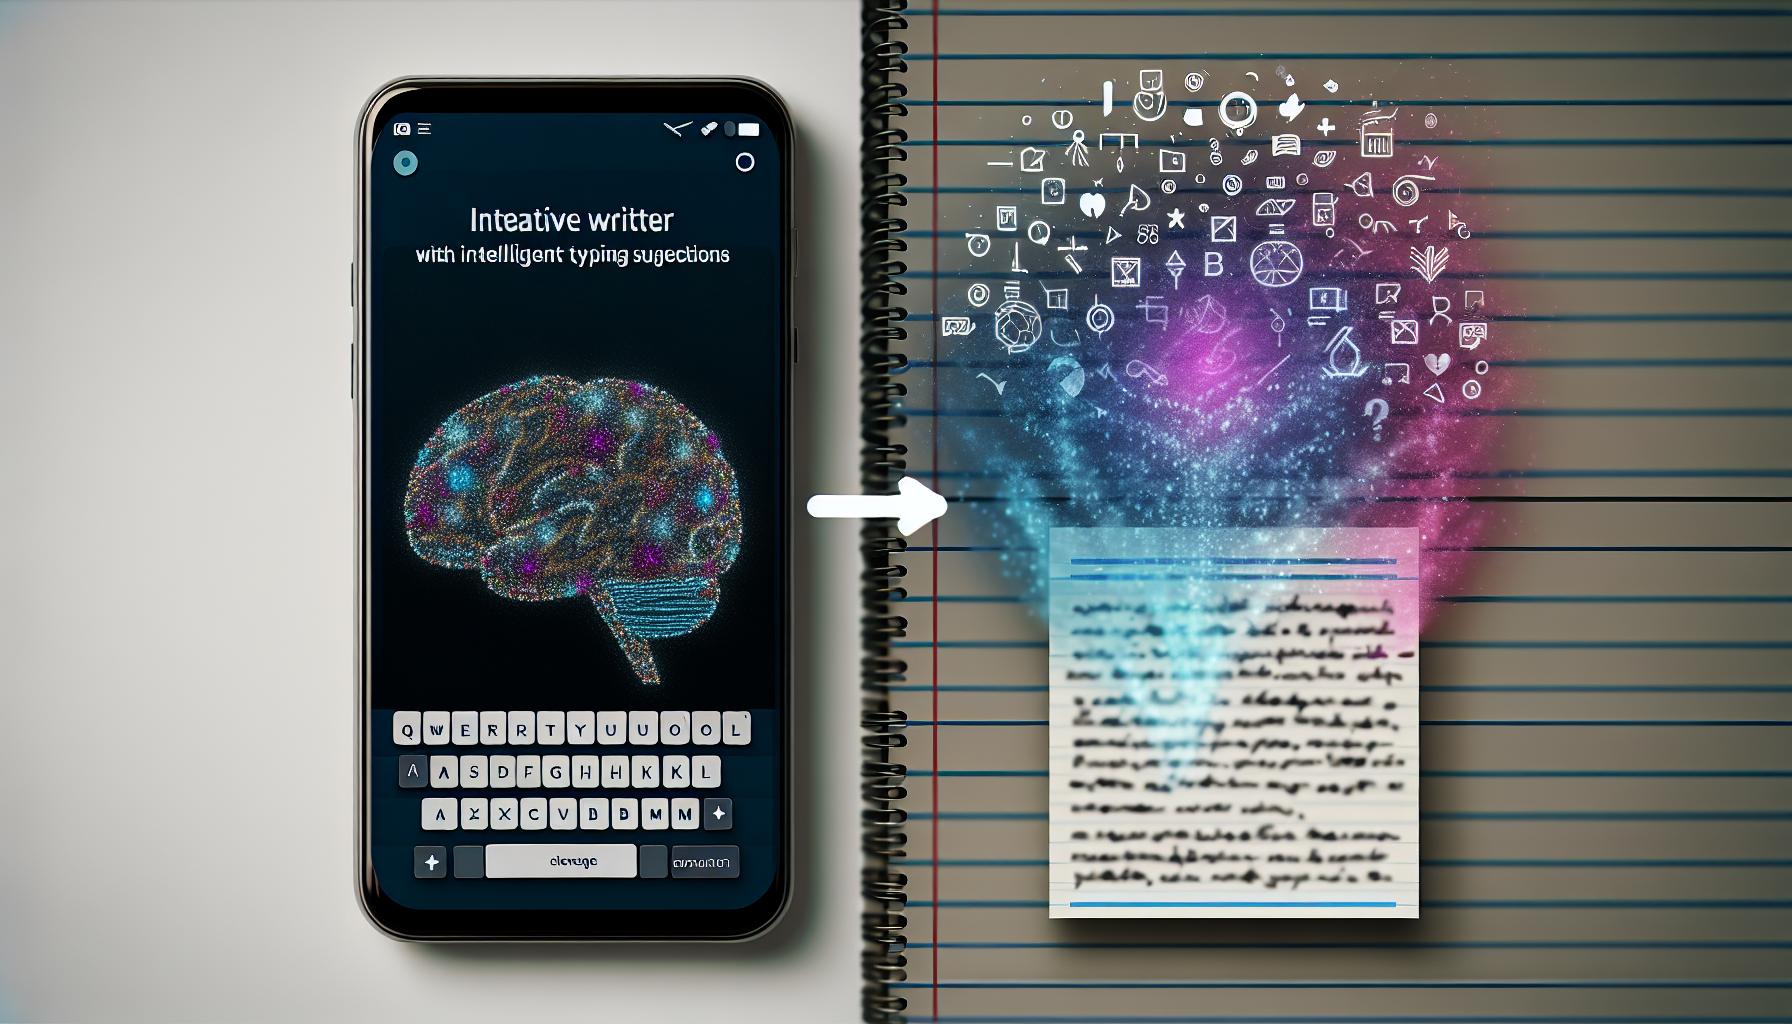 The Role of AIType in Creative Writing on iPhone --- Explore the creative writing aids that AIType offers to aspiring writers and novelists using iPhones.